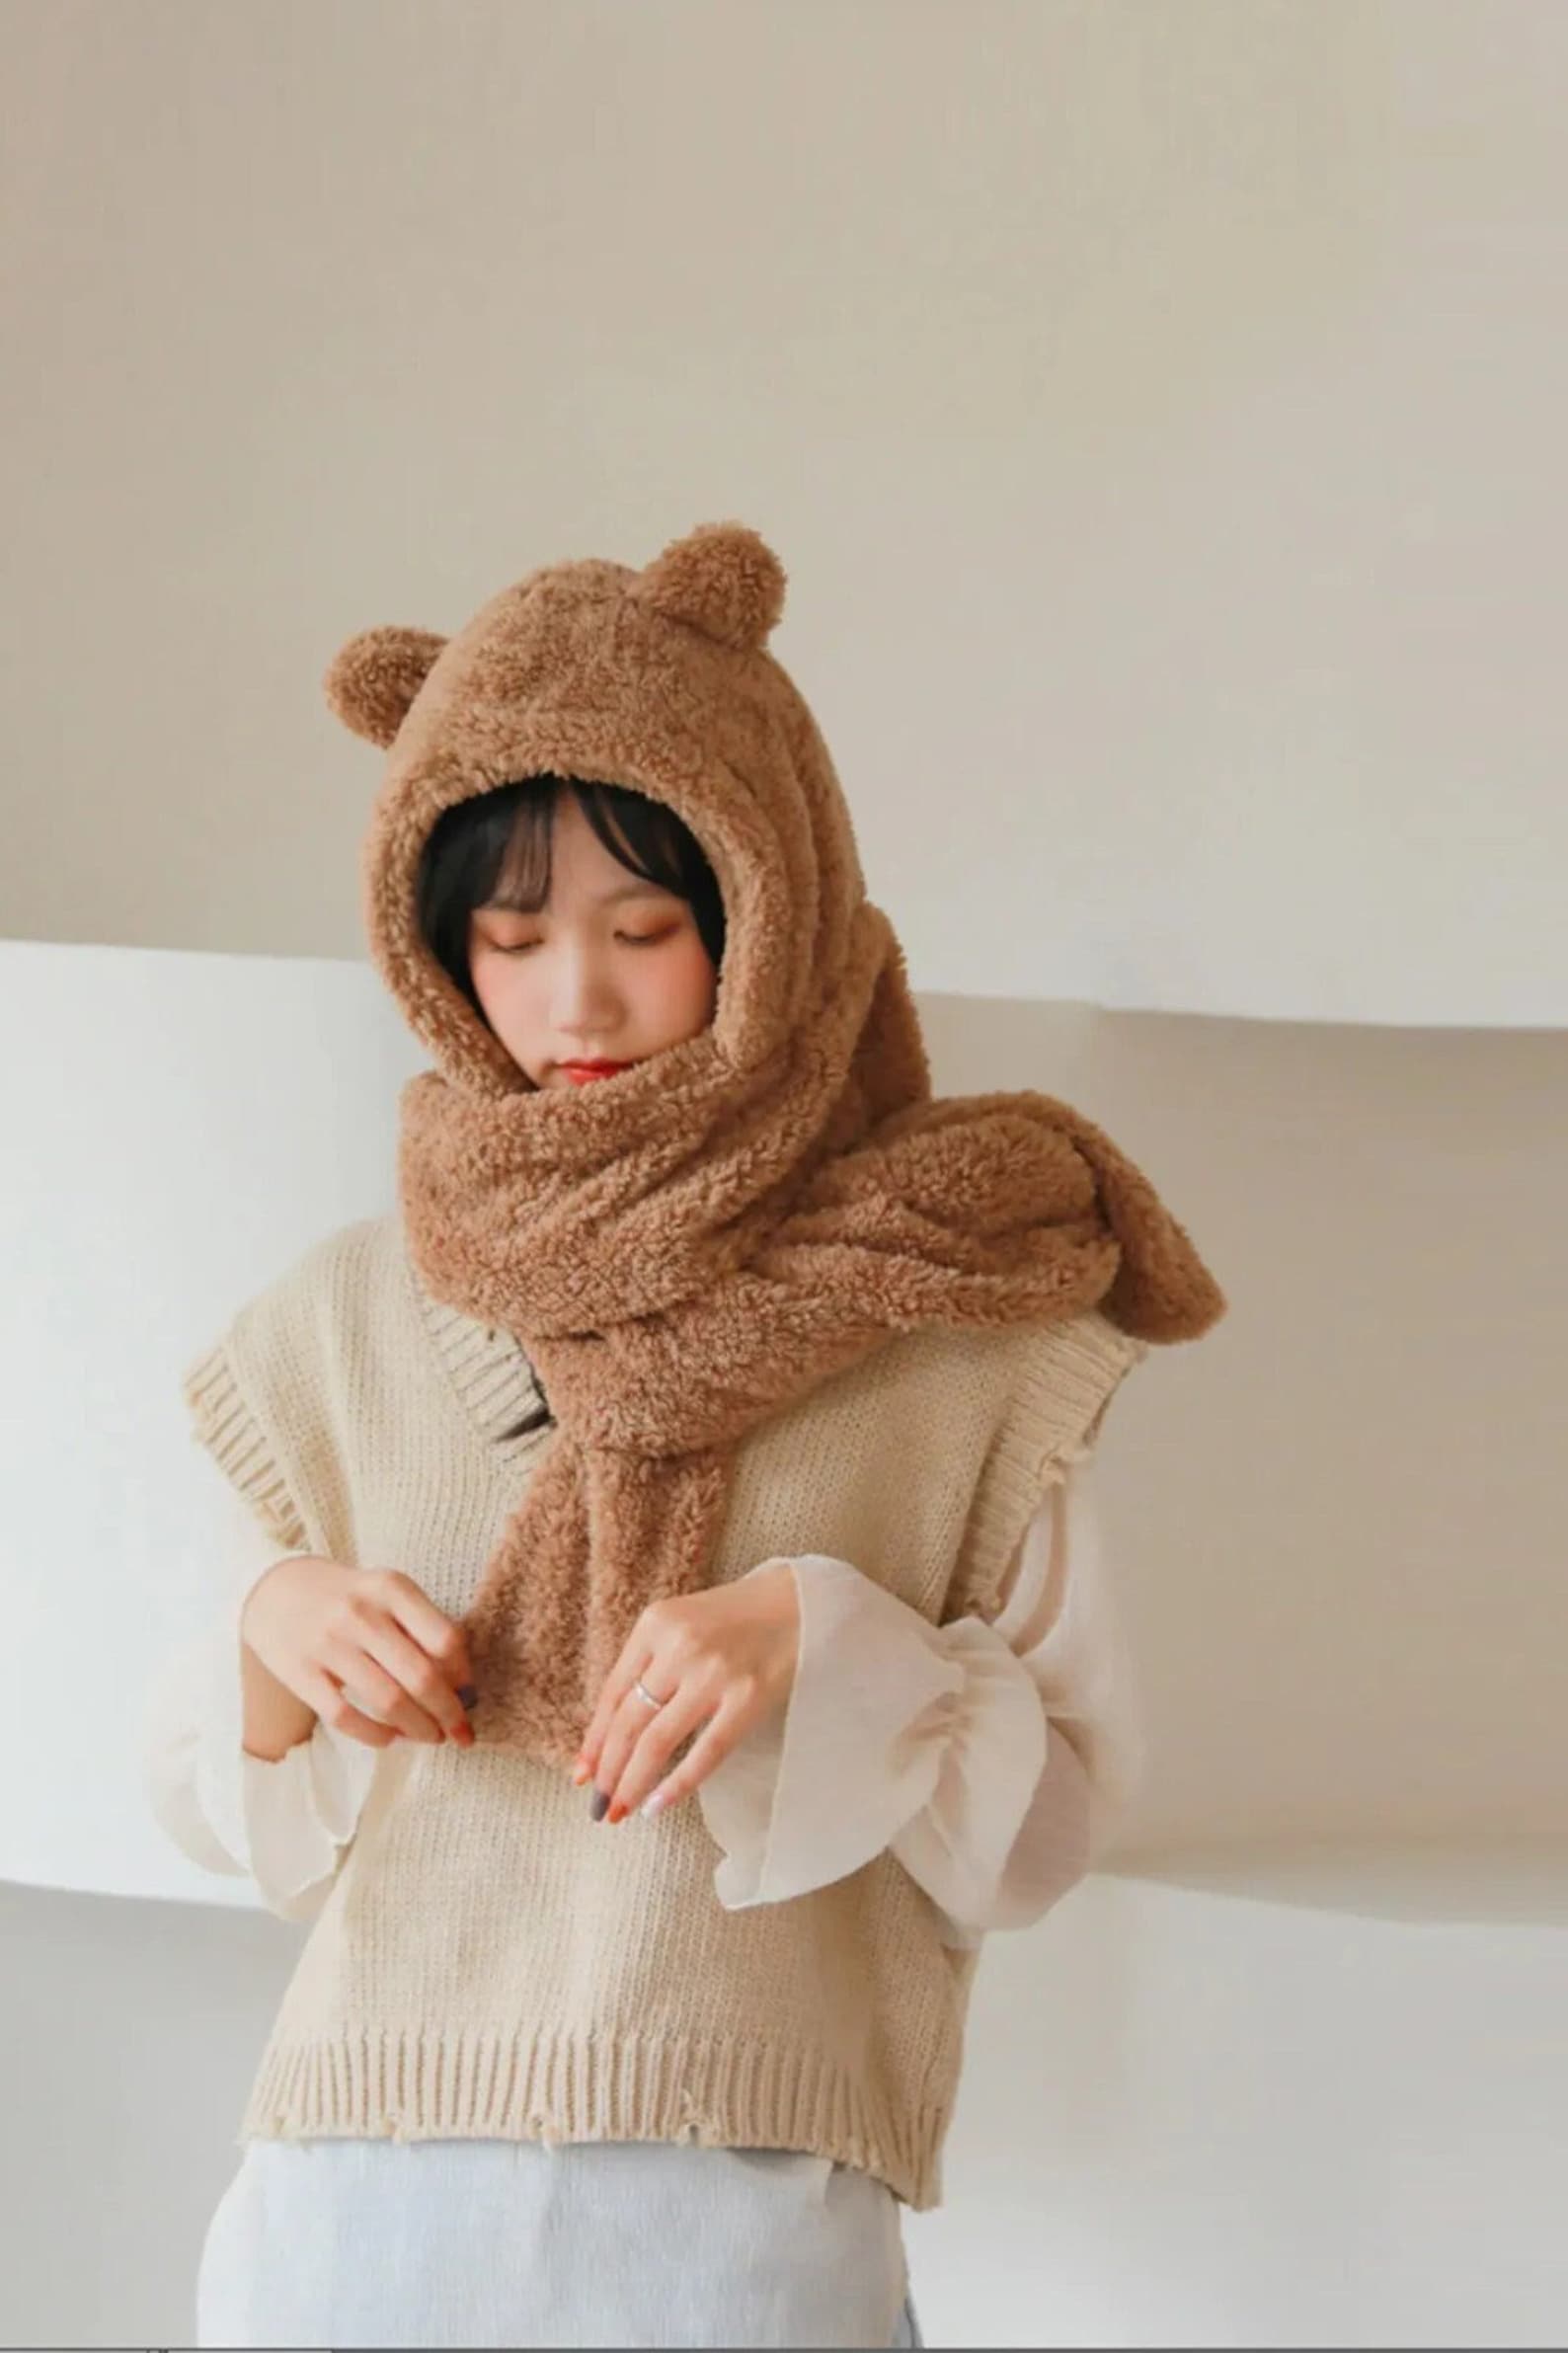 Show off Your Kawaii Look with These Super Cute Poses for Instagram